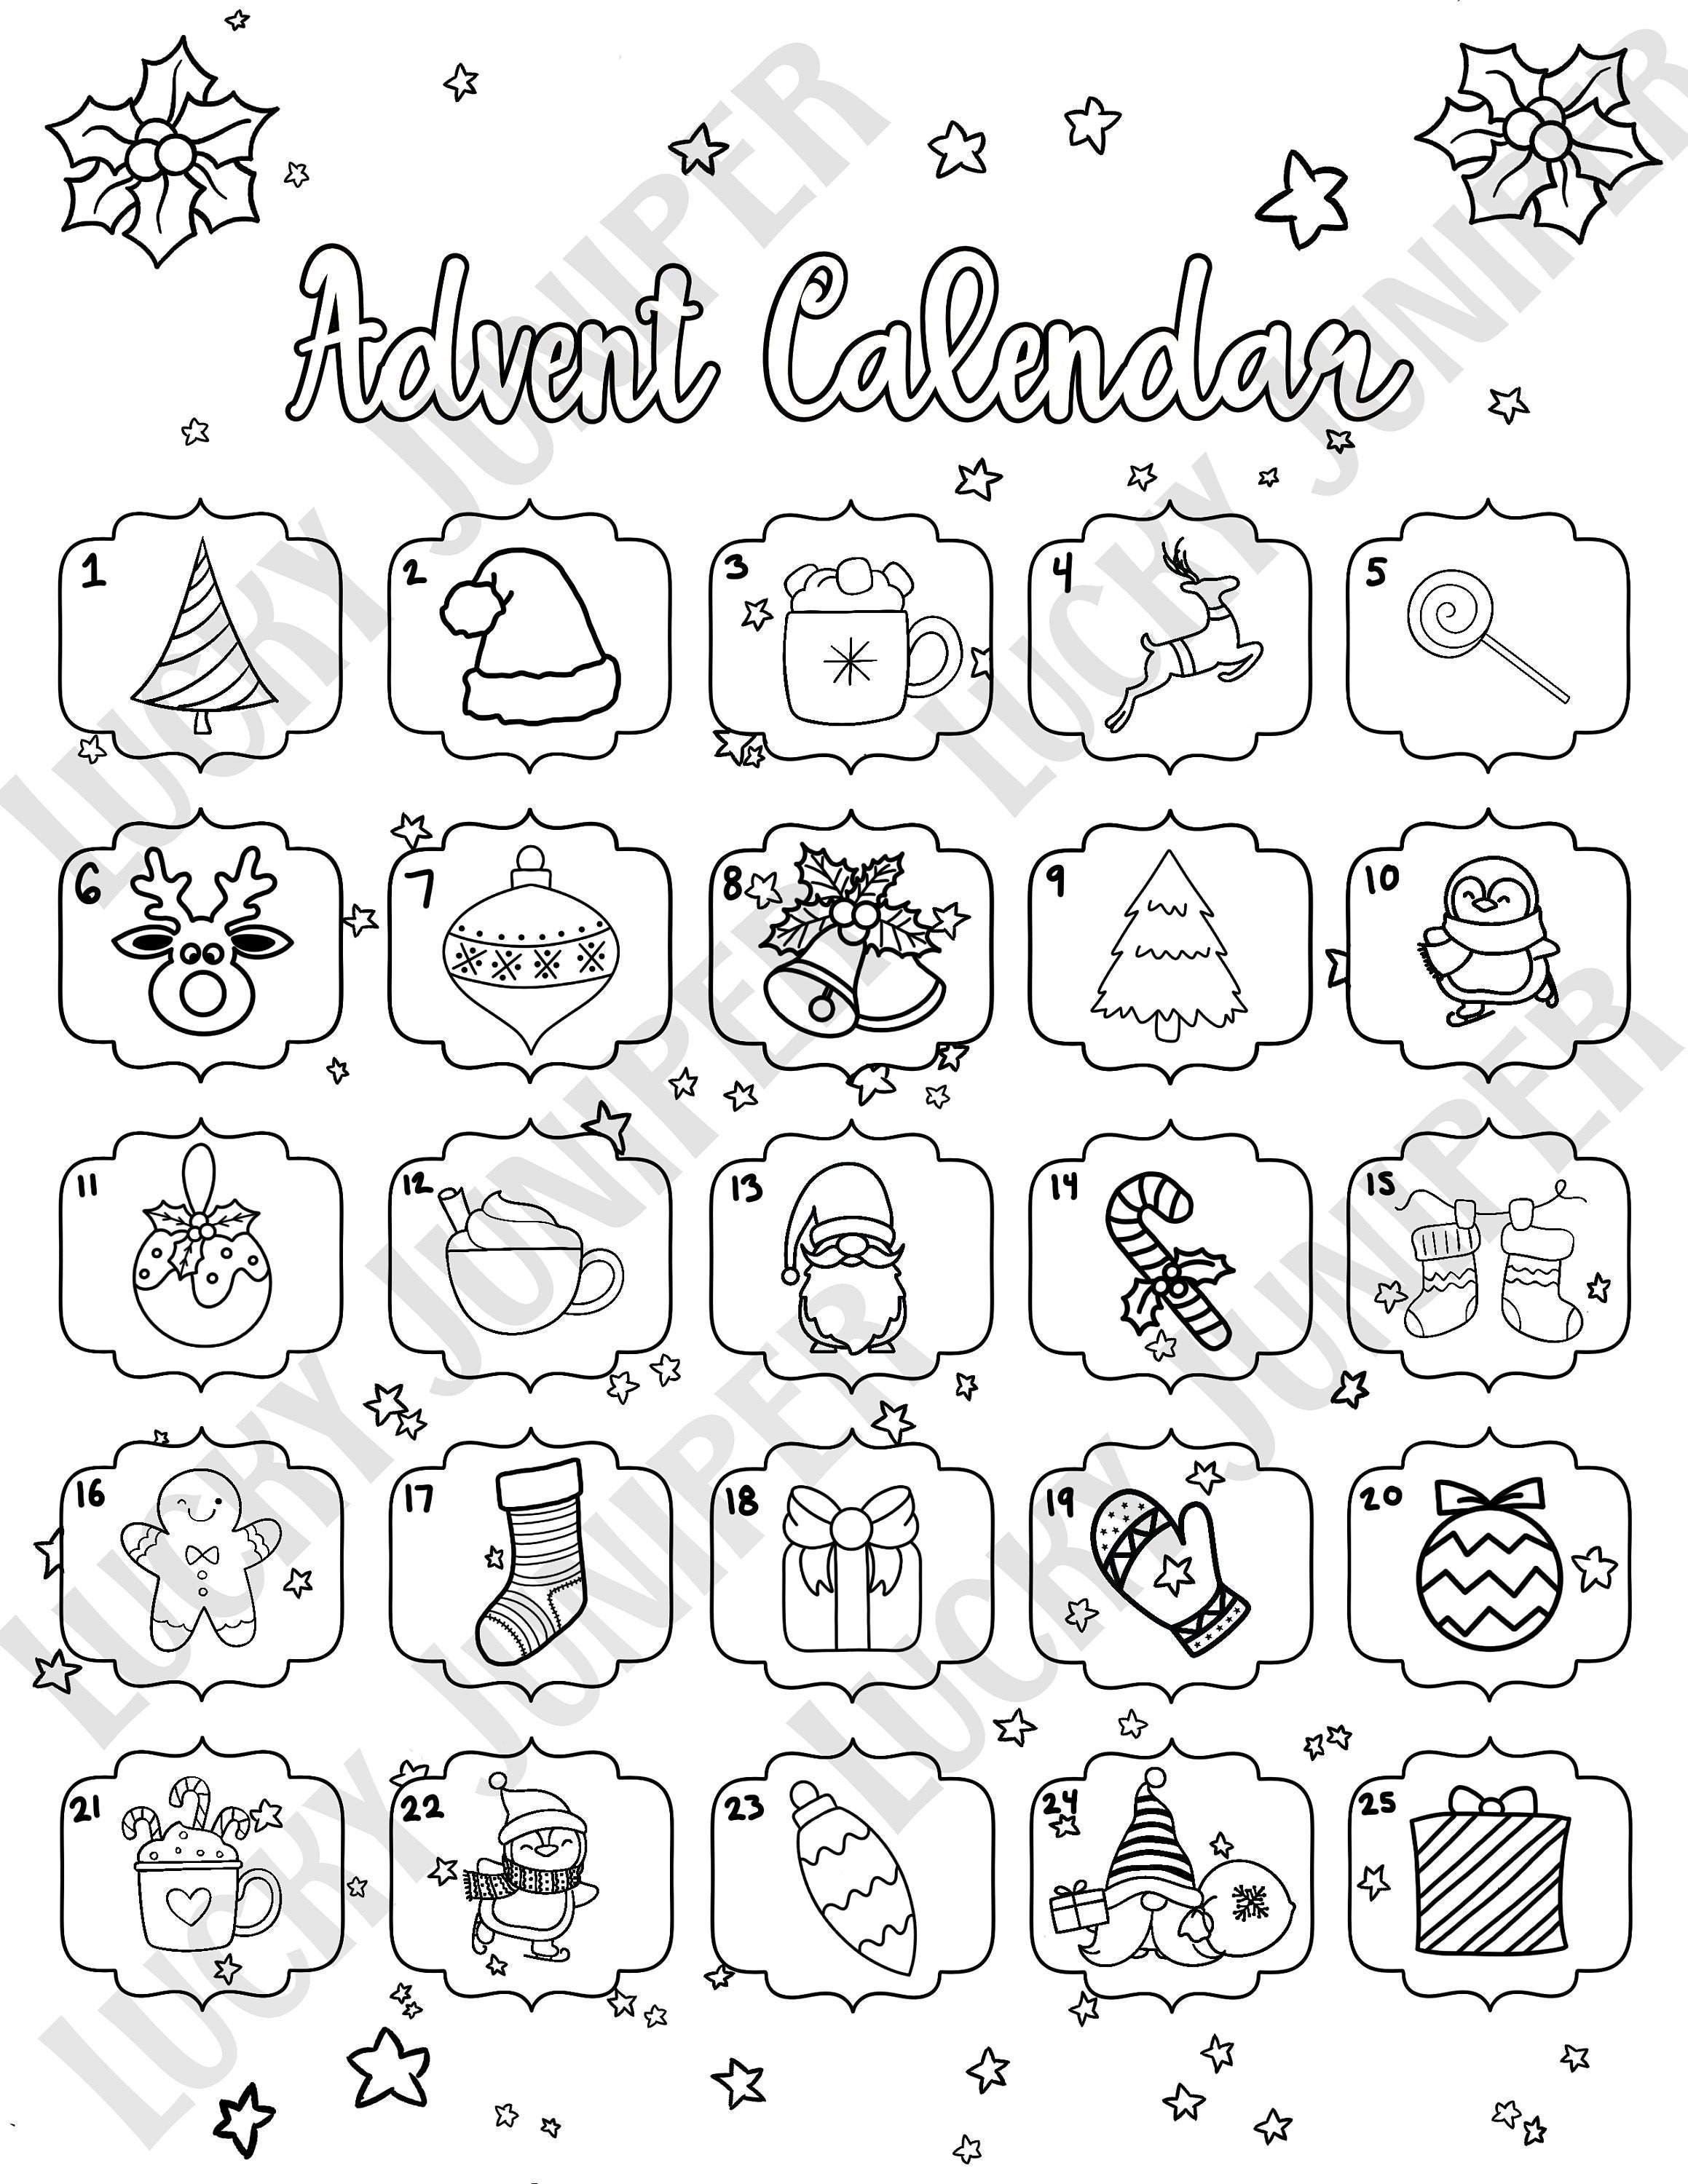 Advent calendar printable coloring pages christmas countdown holiday